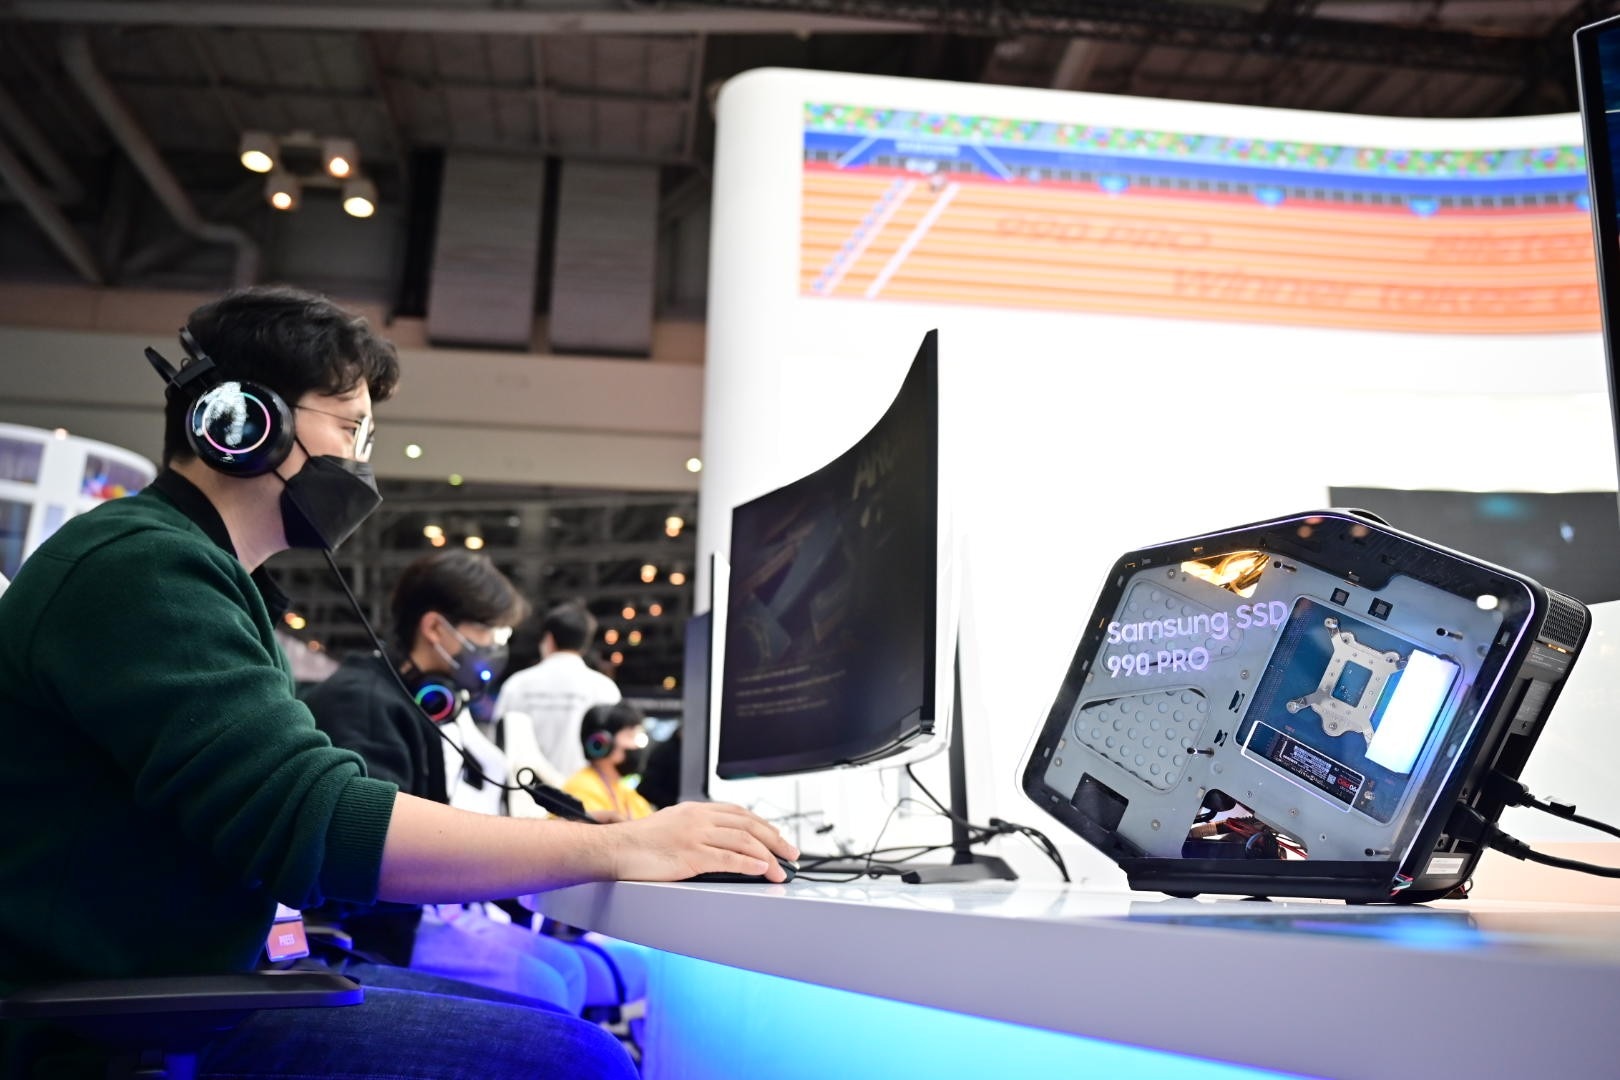 A man is experiencing games on a PC equipped with Samsung SSD 990 PRO.